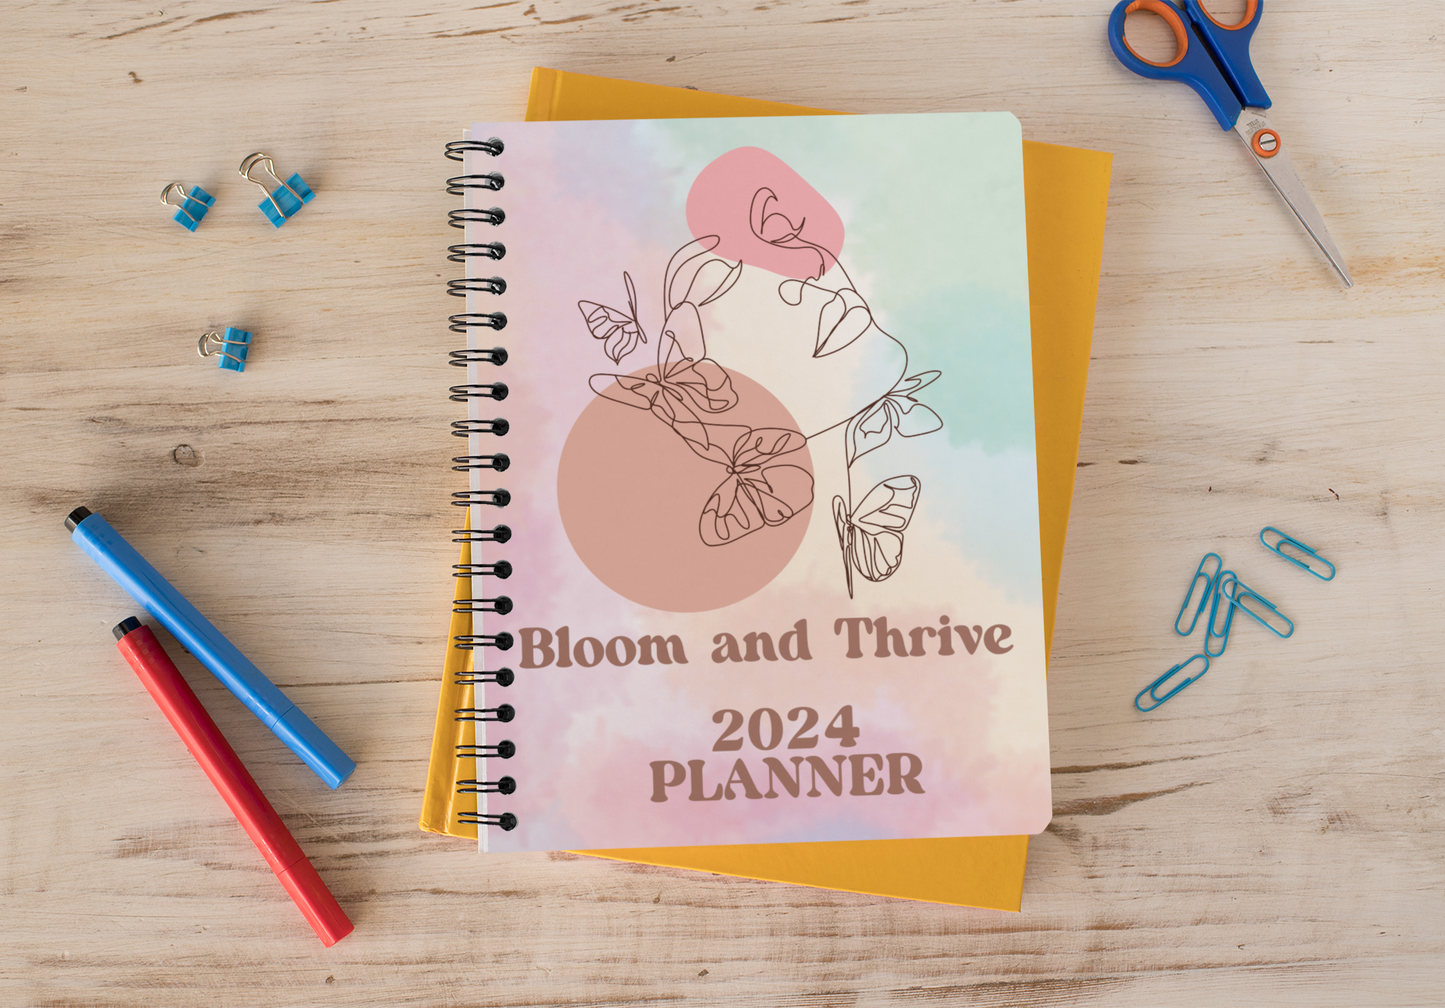 2024 Planner- Bloom And Thrive